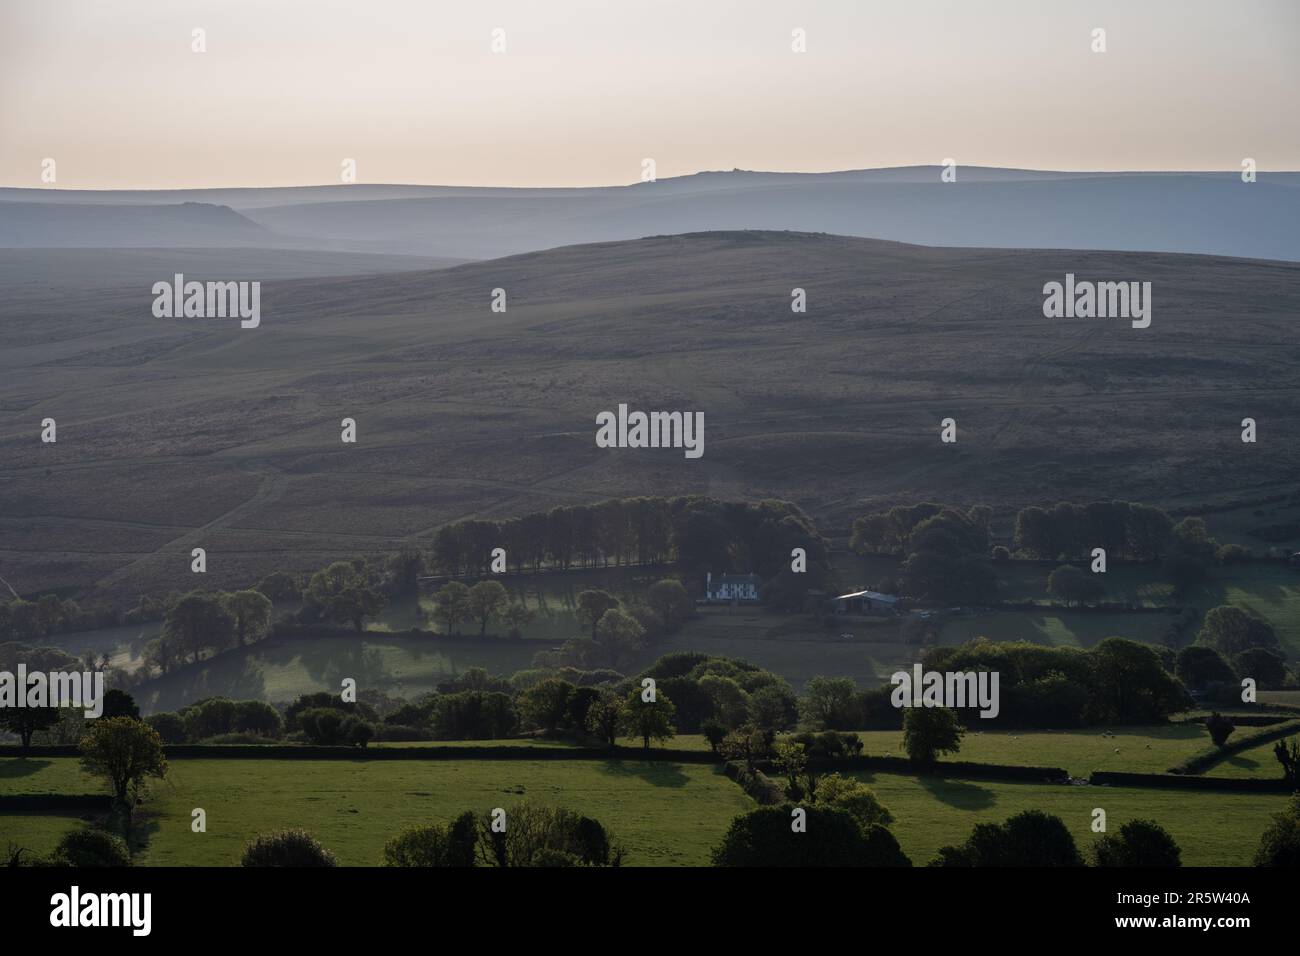 Morning light shines on Gibbet Hill and the distant hills of the Willsworthy Range in Dartmoor as seen from Brent Tor hill in West Devon. Stock Photo